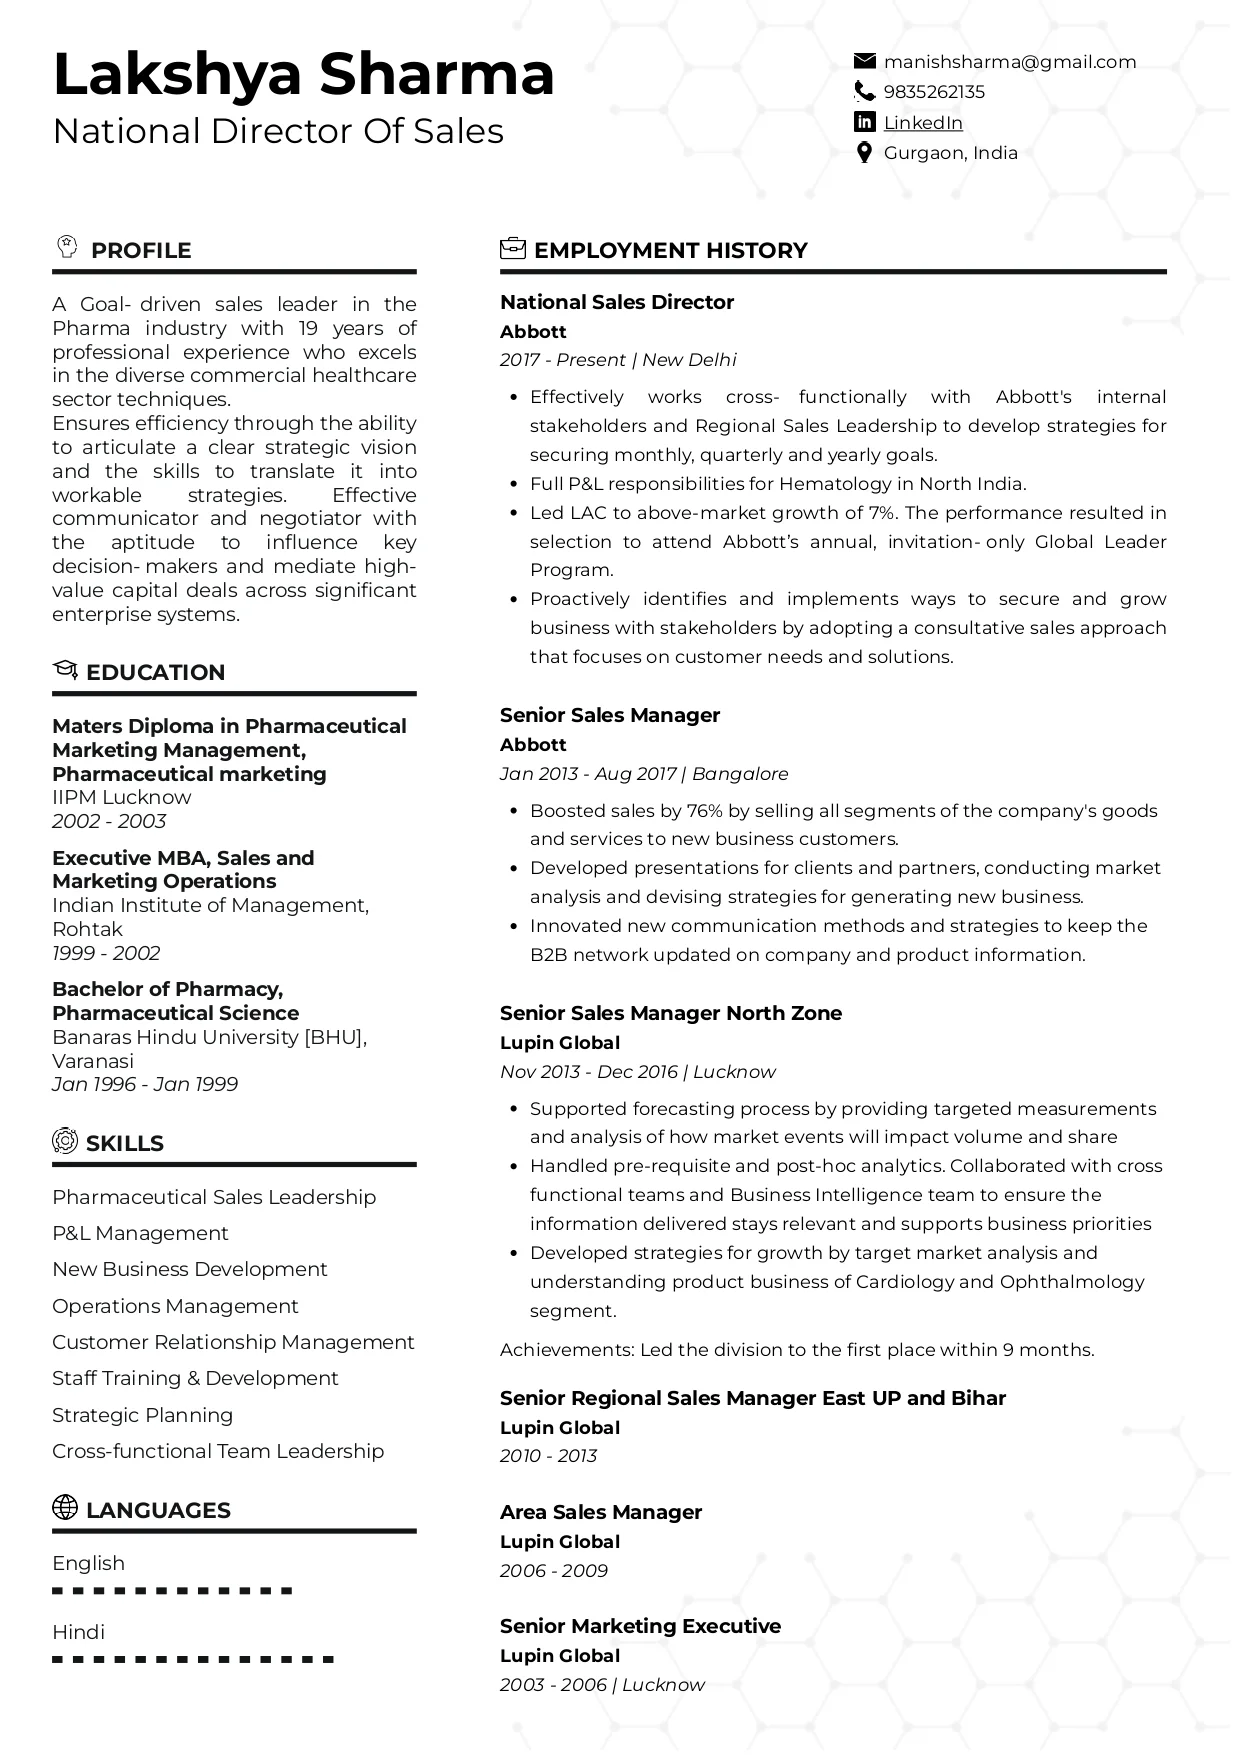 Sample Resume of National Director of Sales | Free Resume Templates & Samples on Resumod.co